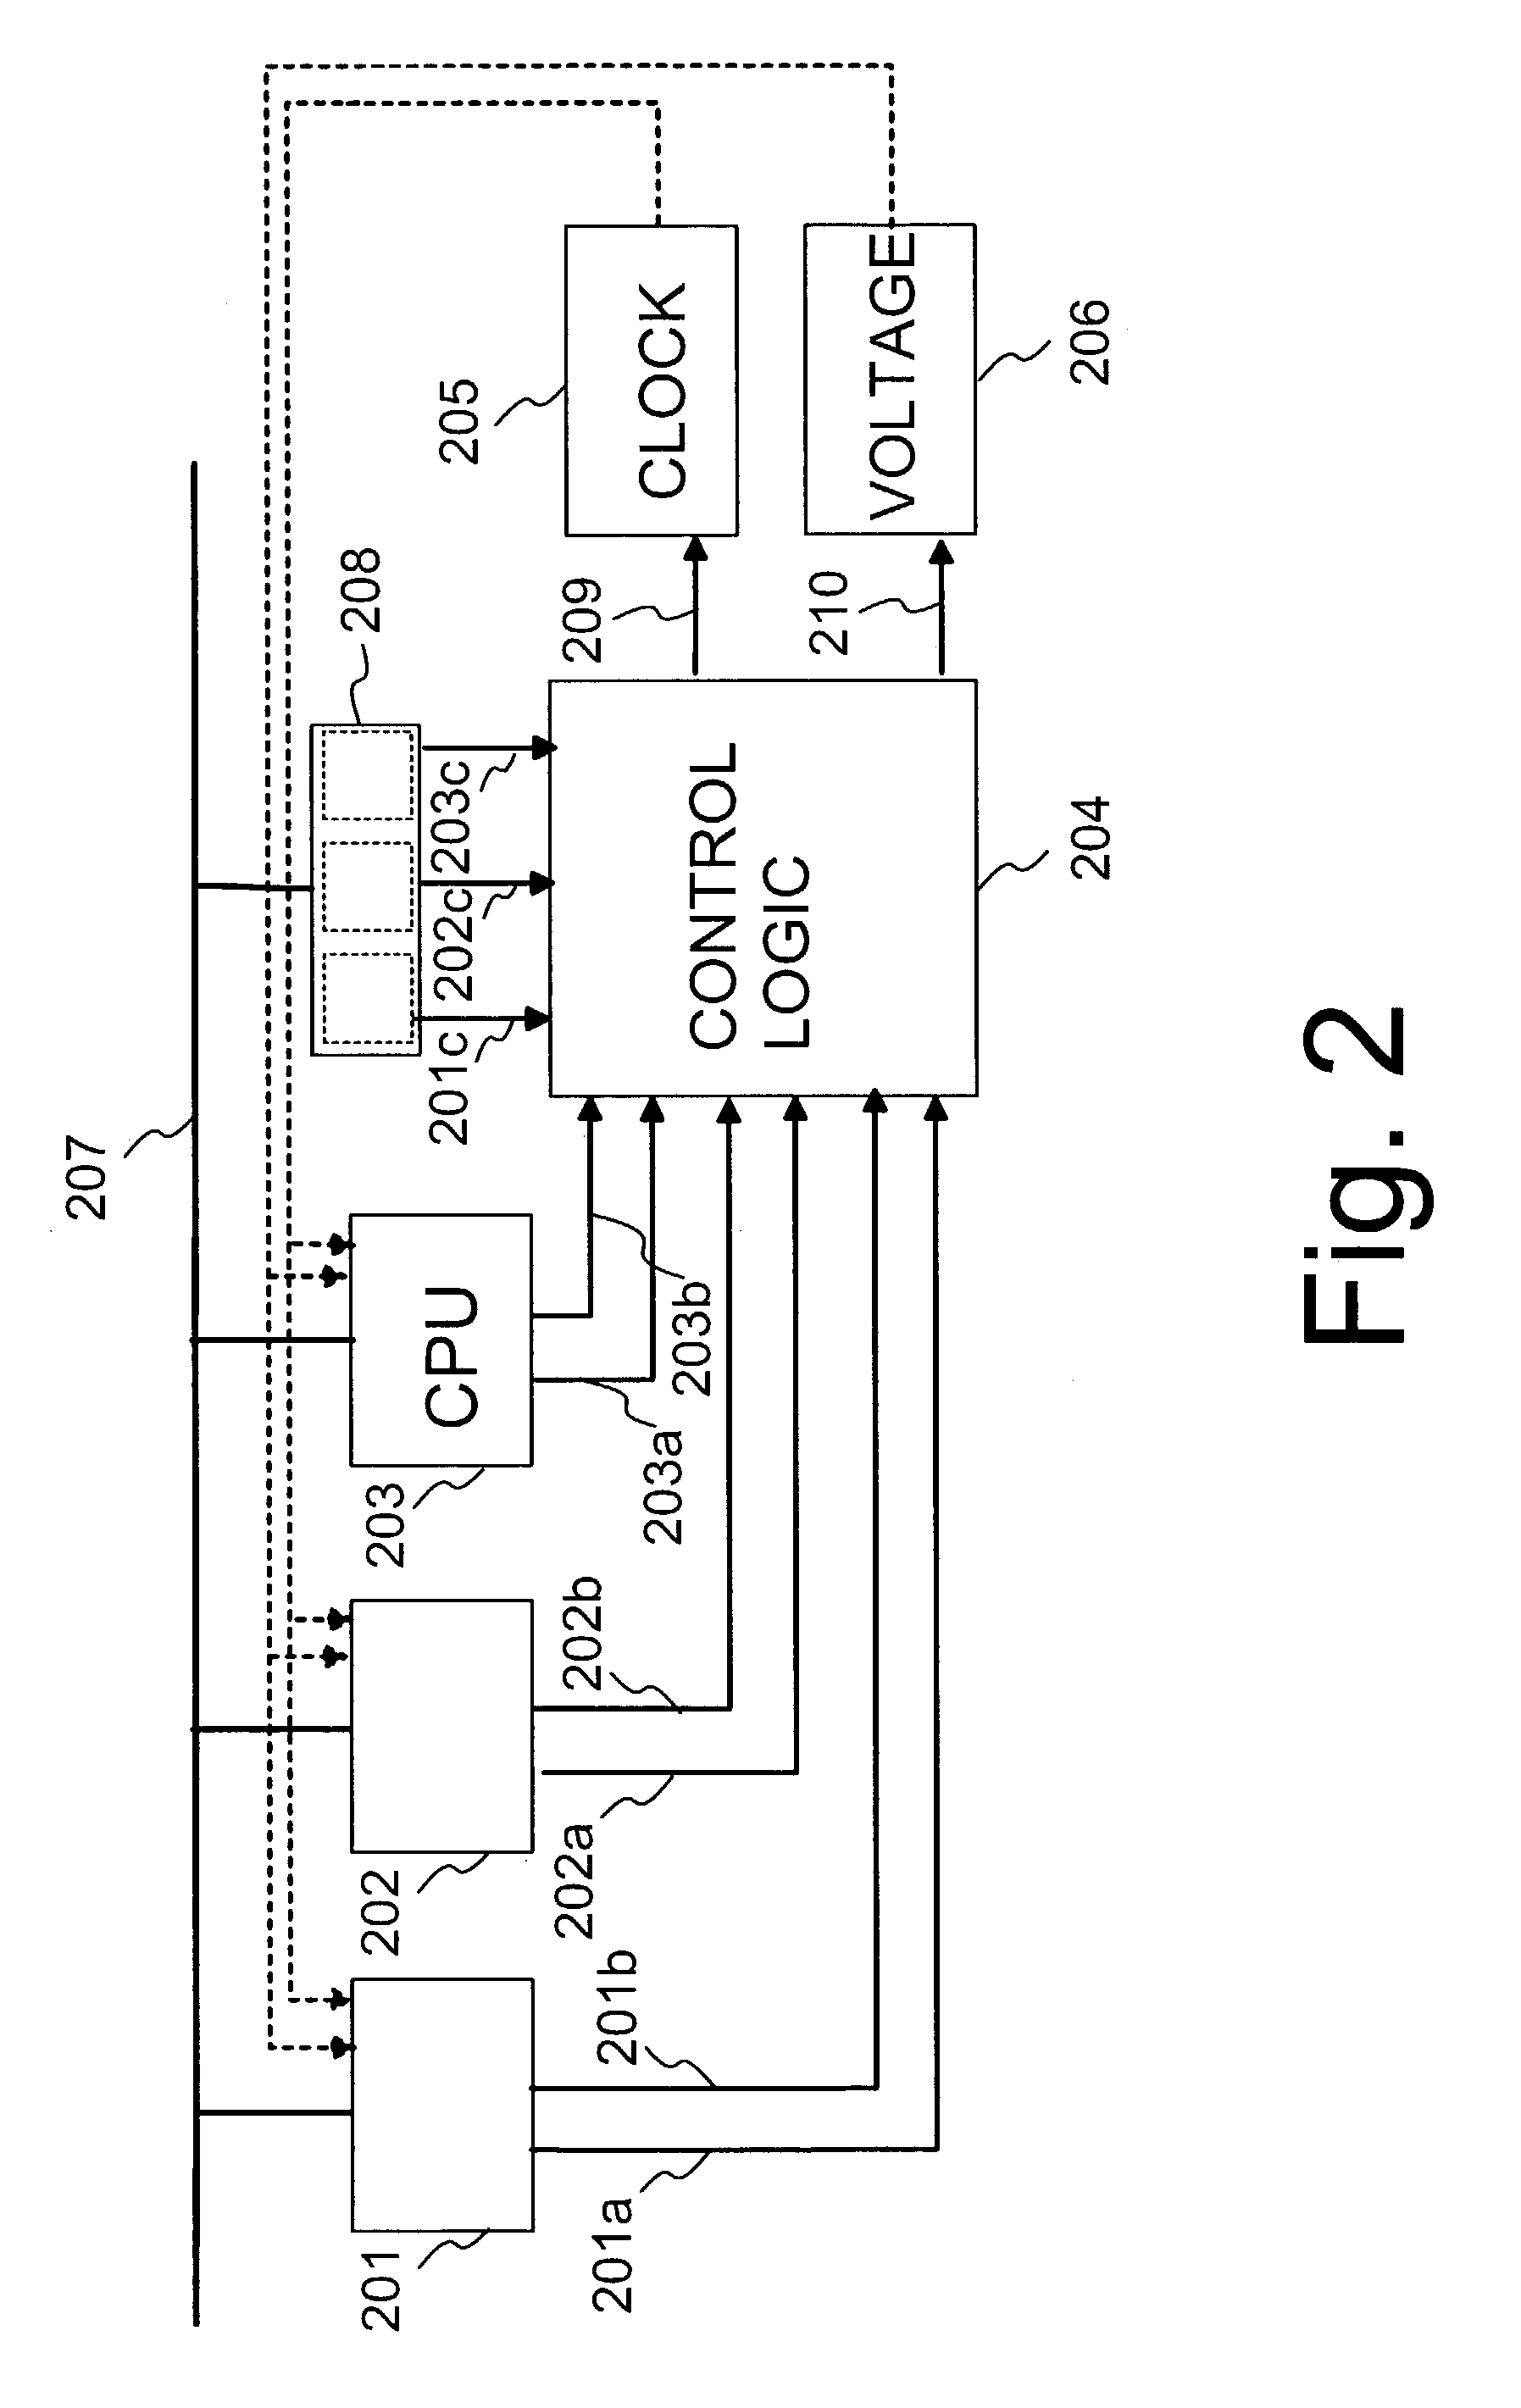 Dynamic power control in integrated circuits